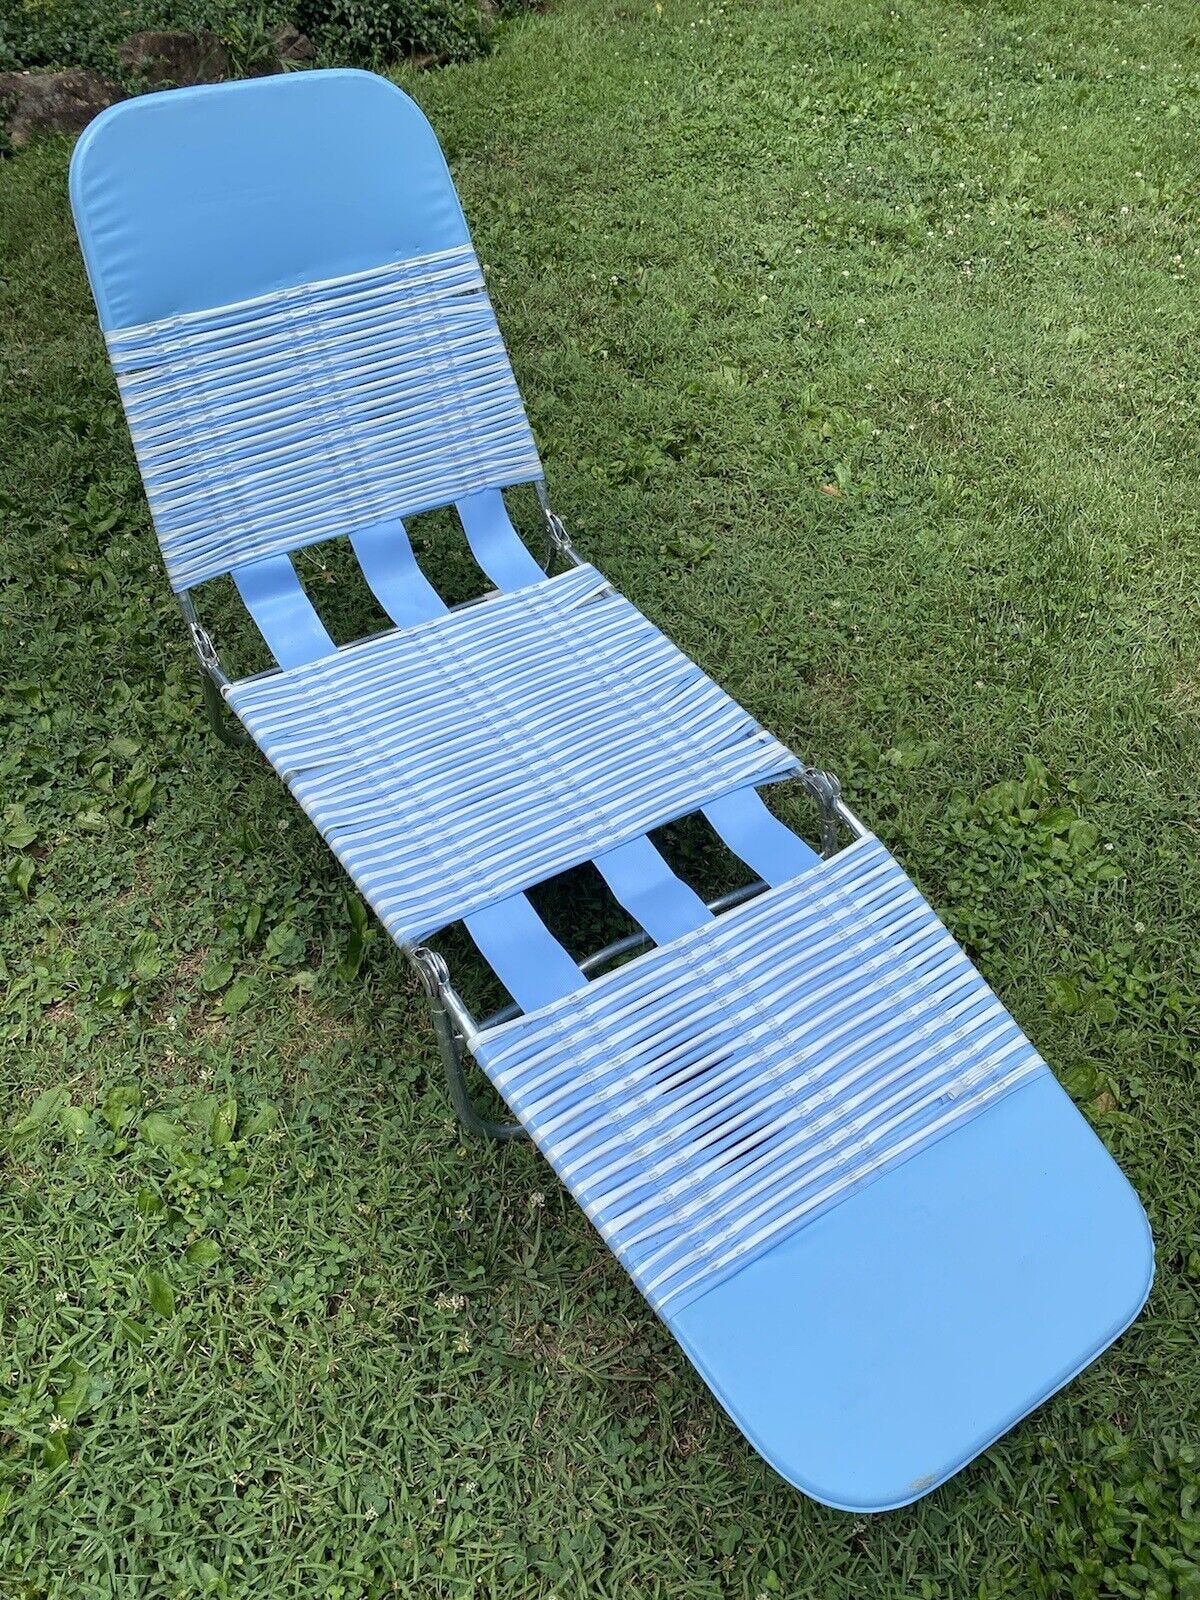 A folding lounge chair made of an aluminum tube frame and alternating blue and white plastic straps in a horizontal stripe pattern is shown outdoors on a green grass lawn.